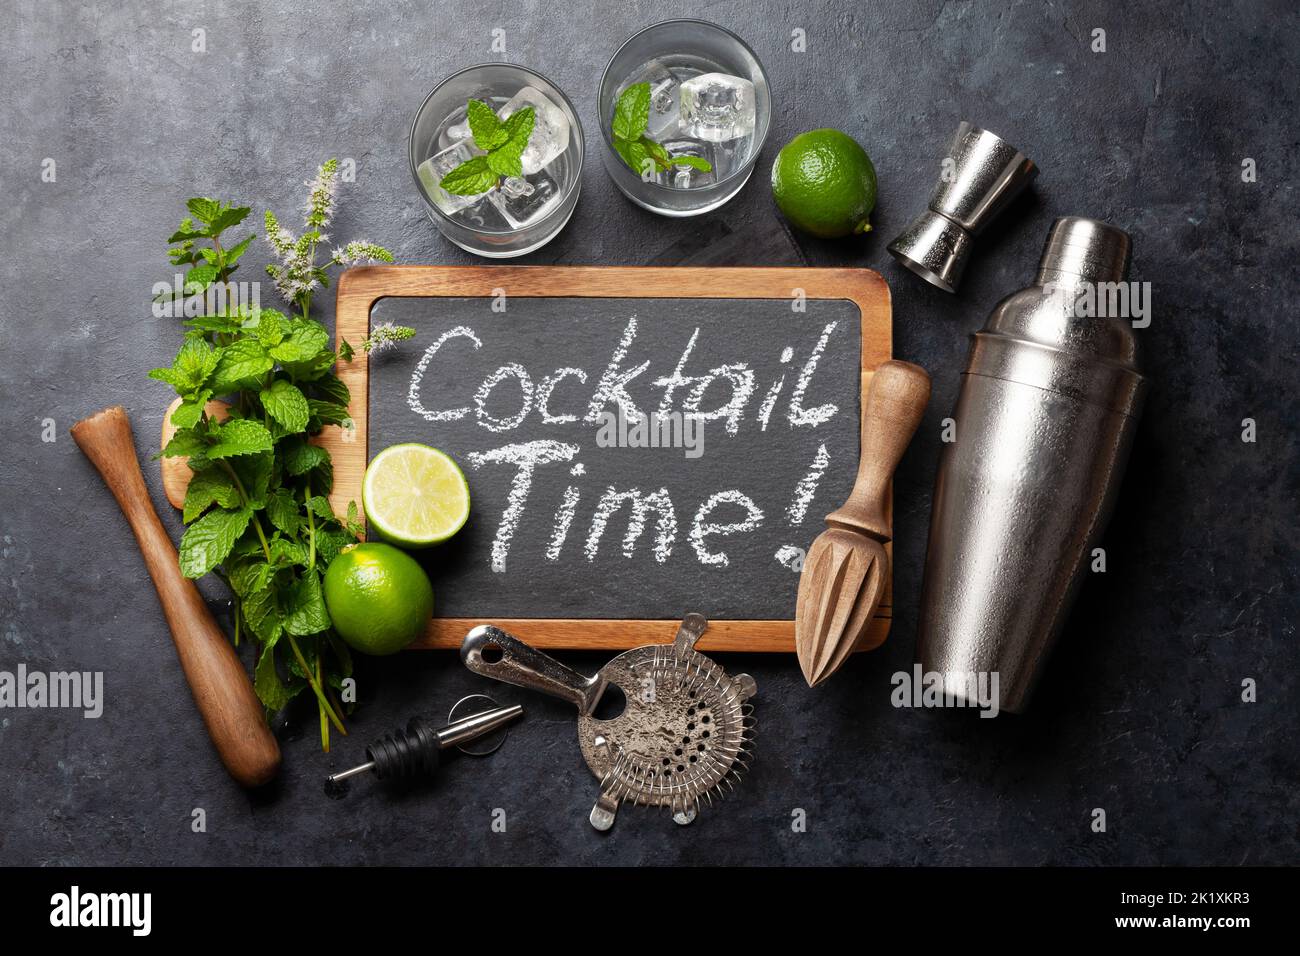 Mojito cocktail ingredients and drinks utensils. On stone table flat lay Stock Photo